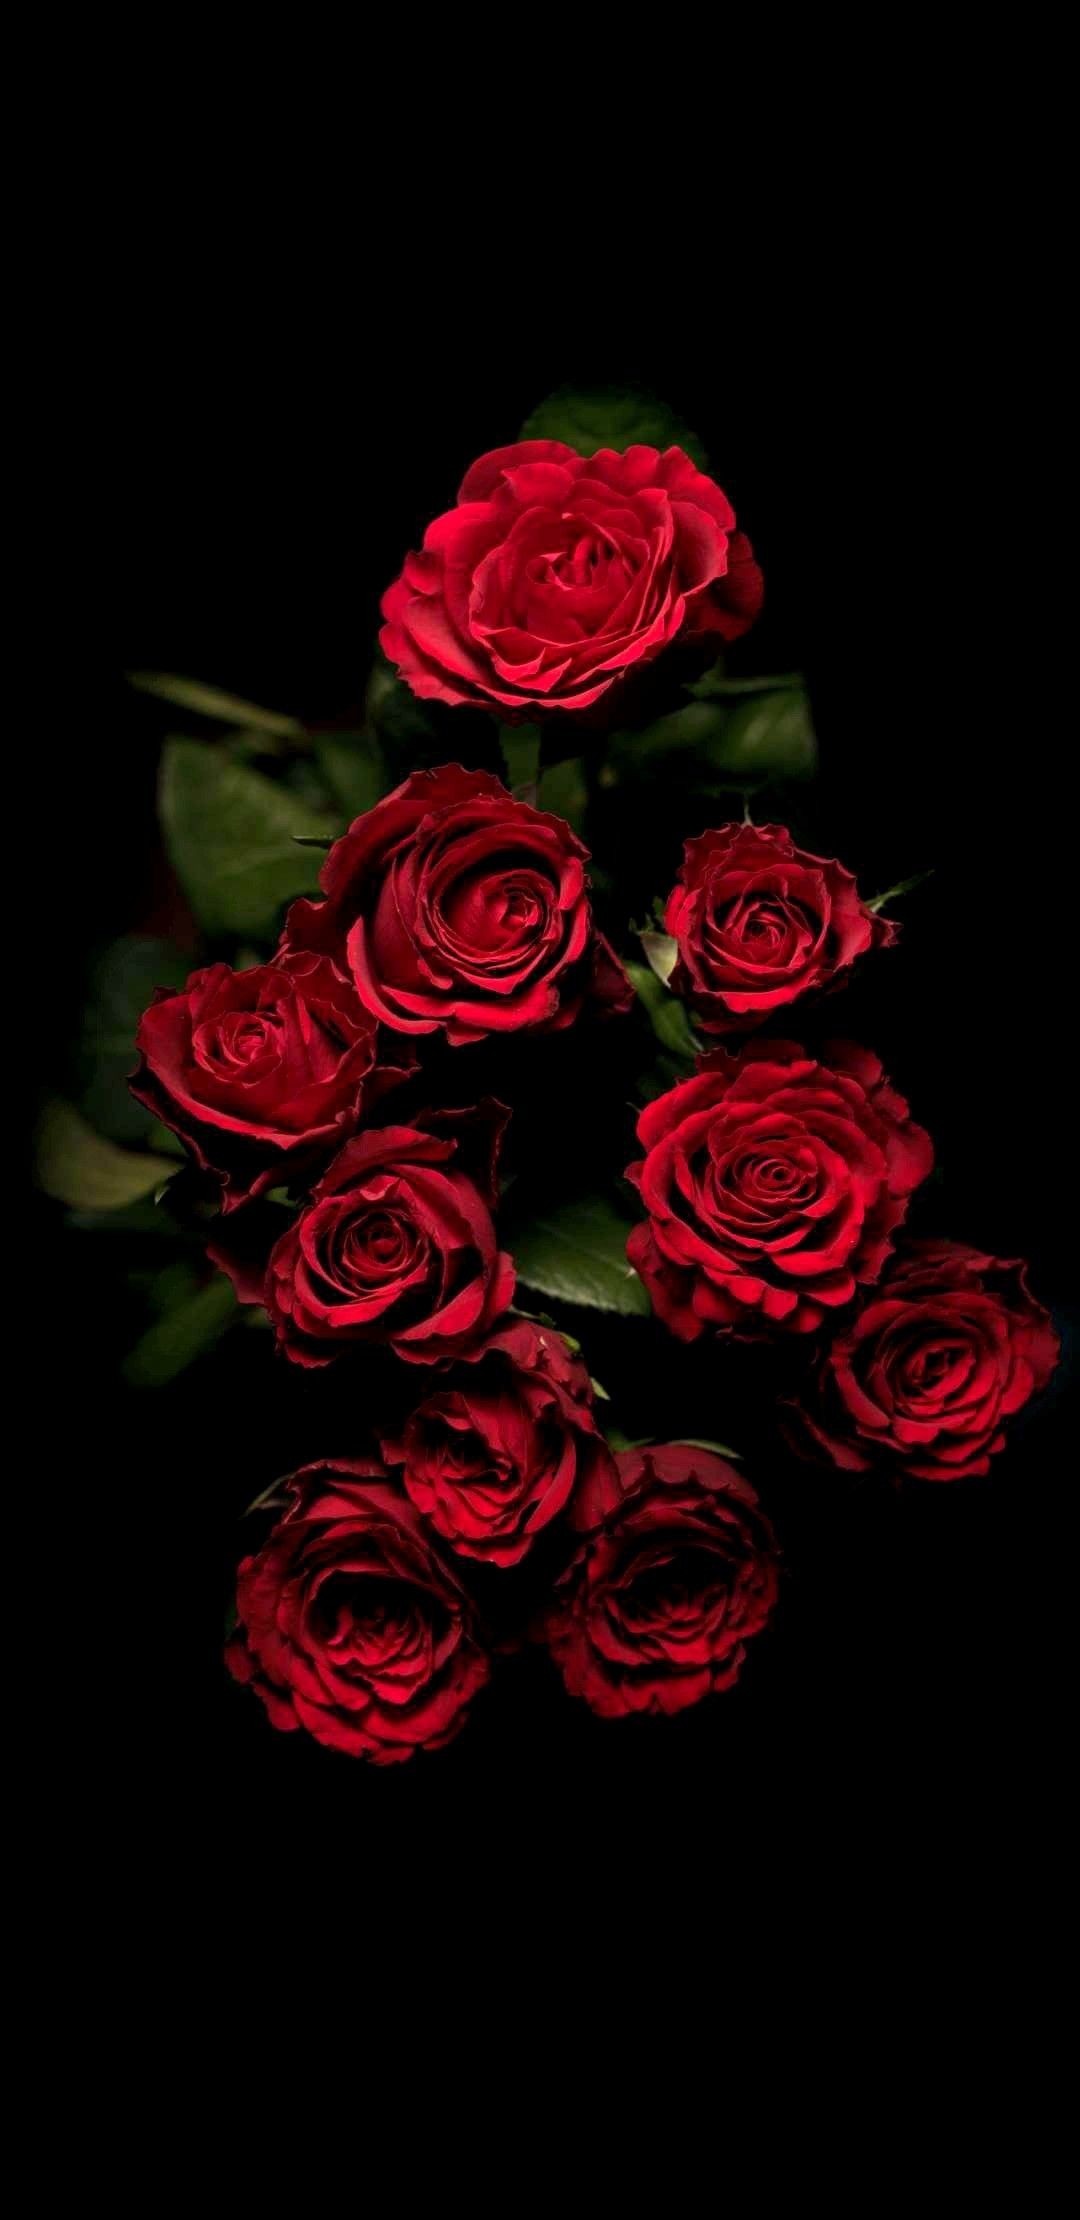 The Most Beautiful Color For A Rosered - Rose Background - HD Wallpaper 